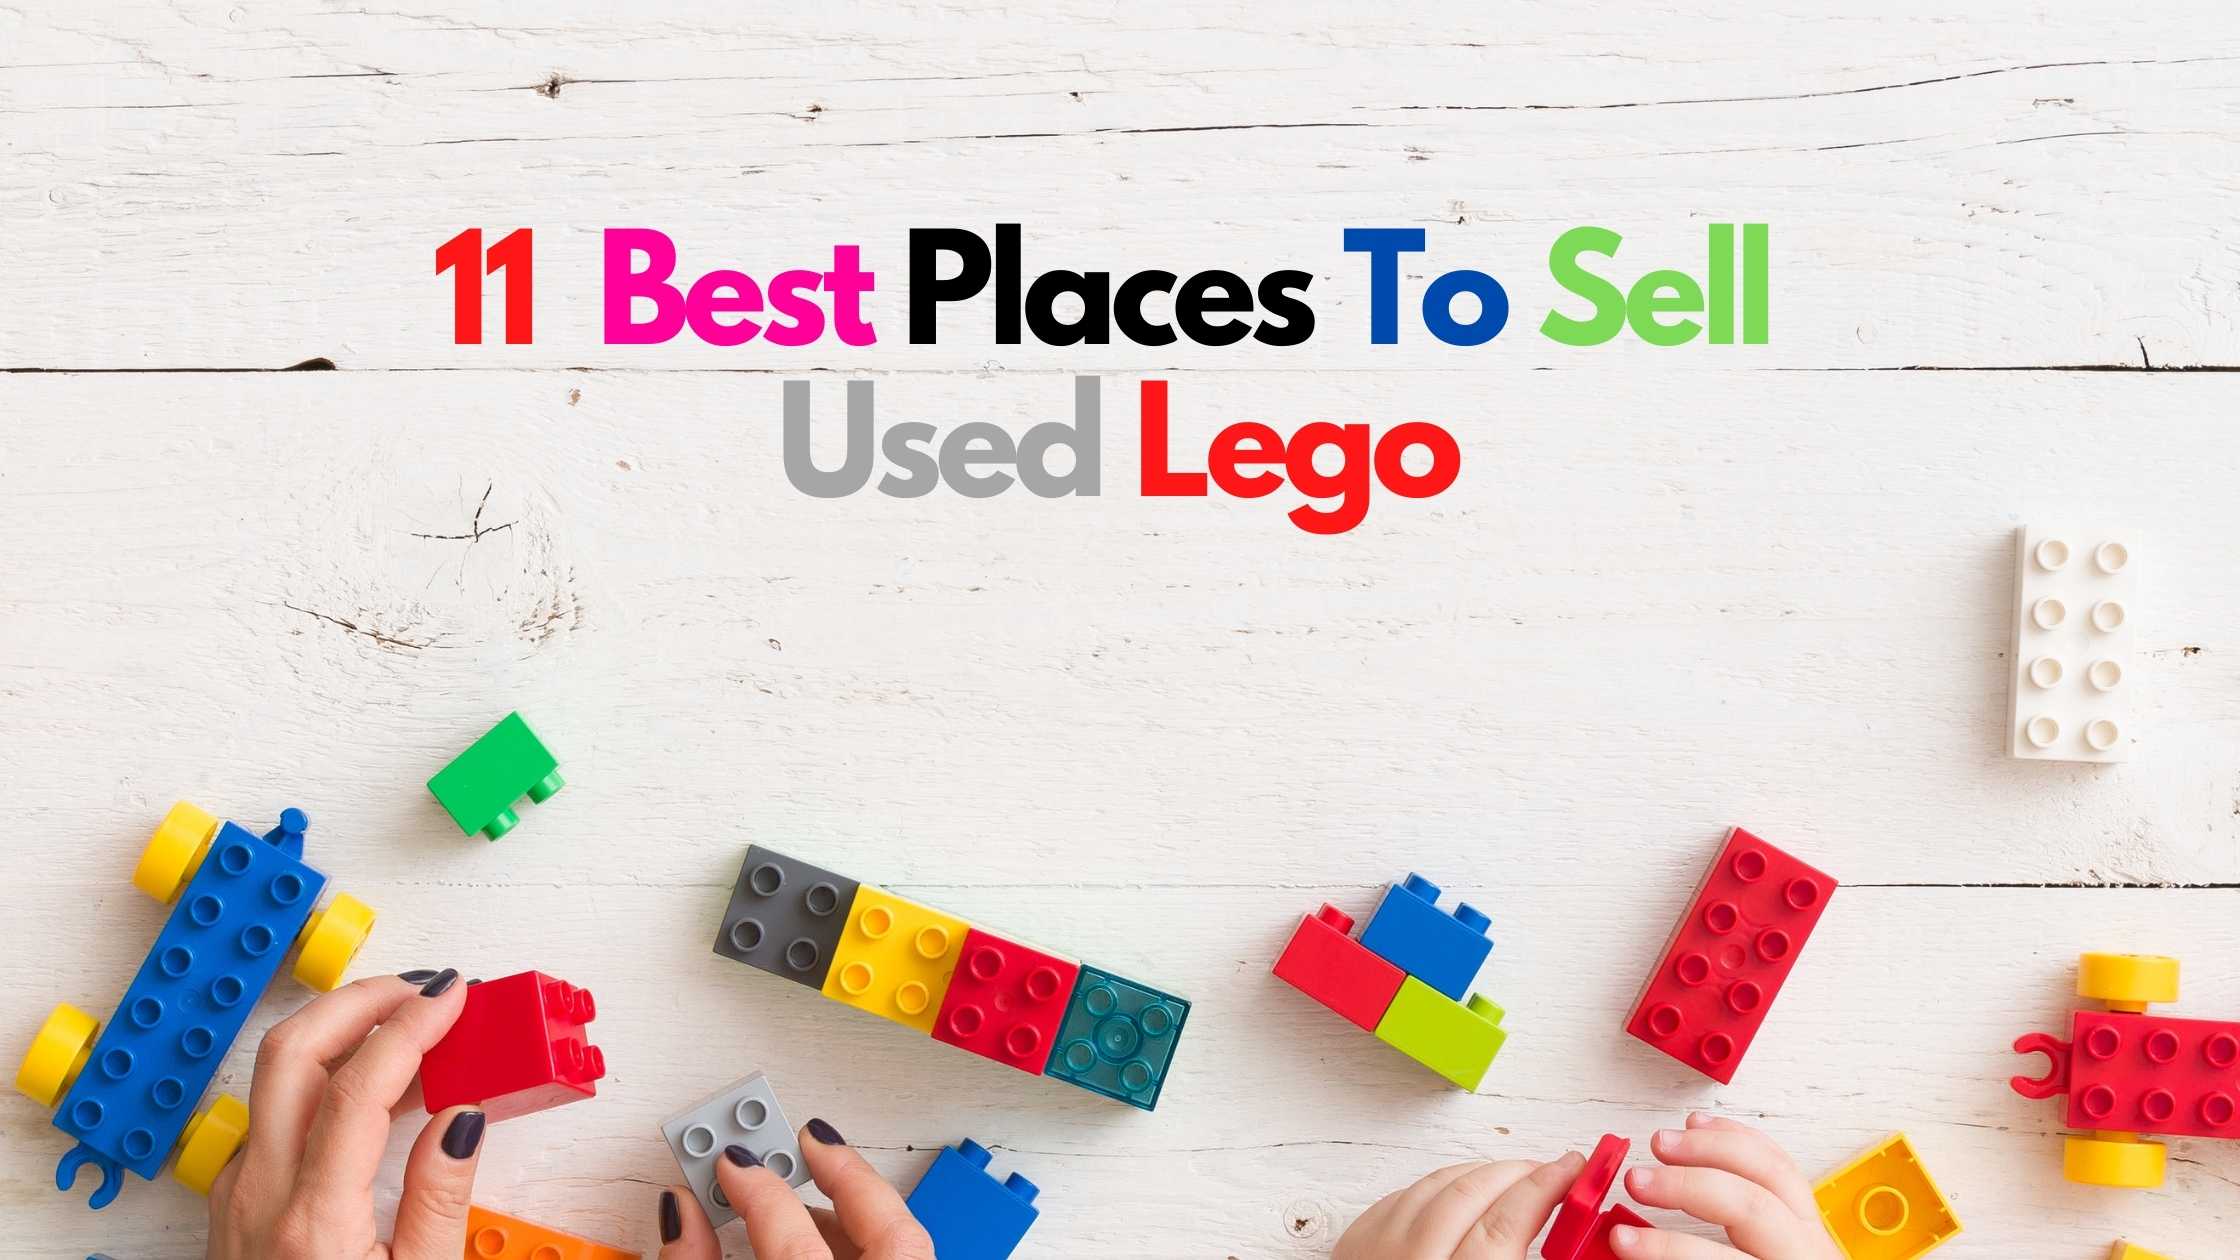 11 Best Places To Sell Used Lego